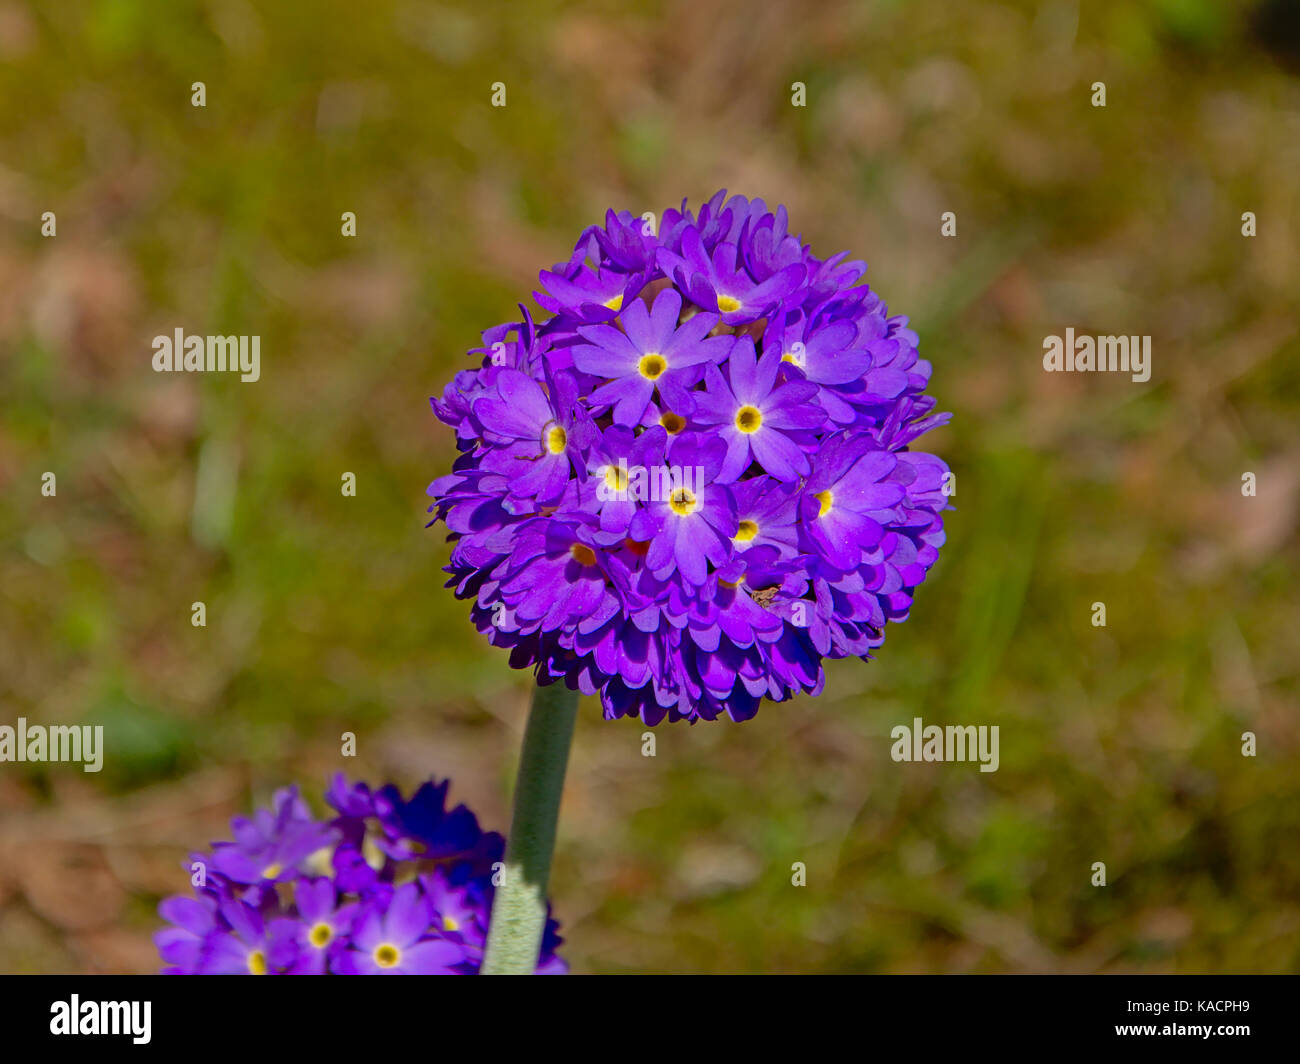 Royalty-Free Stock Photo Download Purple Allium Flower Bulbs Stock Photo - Image: 93372581     allium bulbs flower flowers focus heart purple selecti Stock Photo